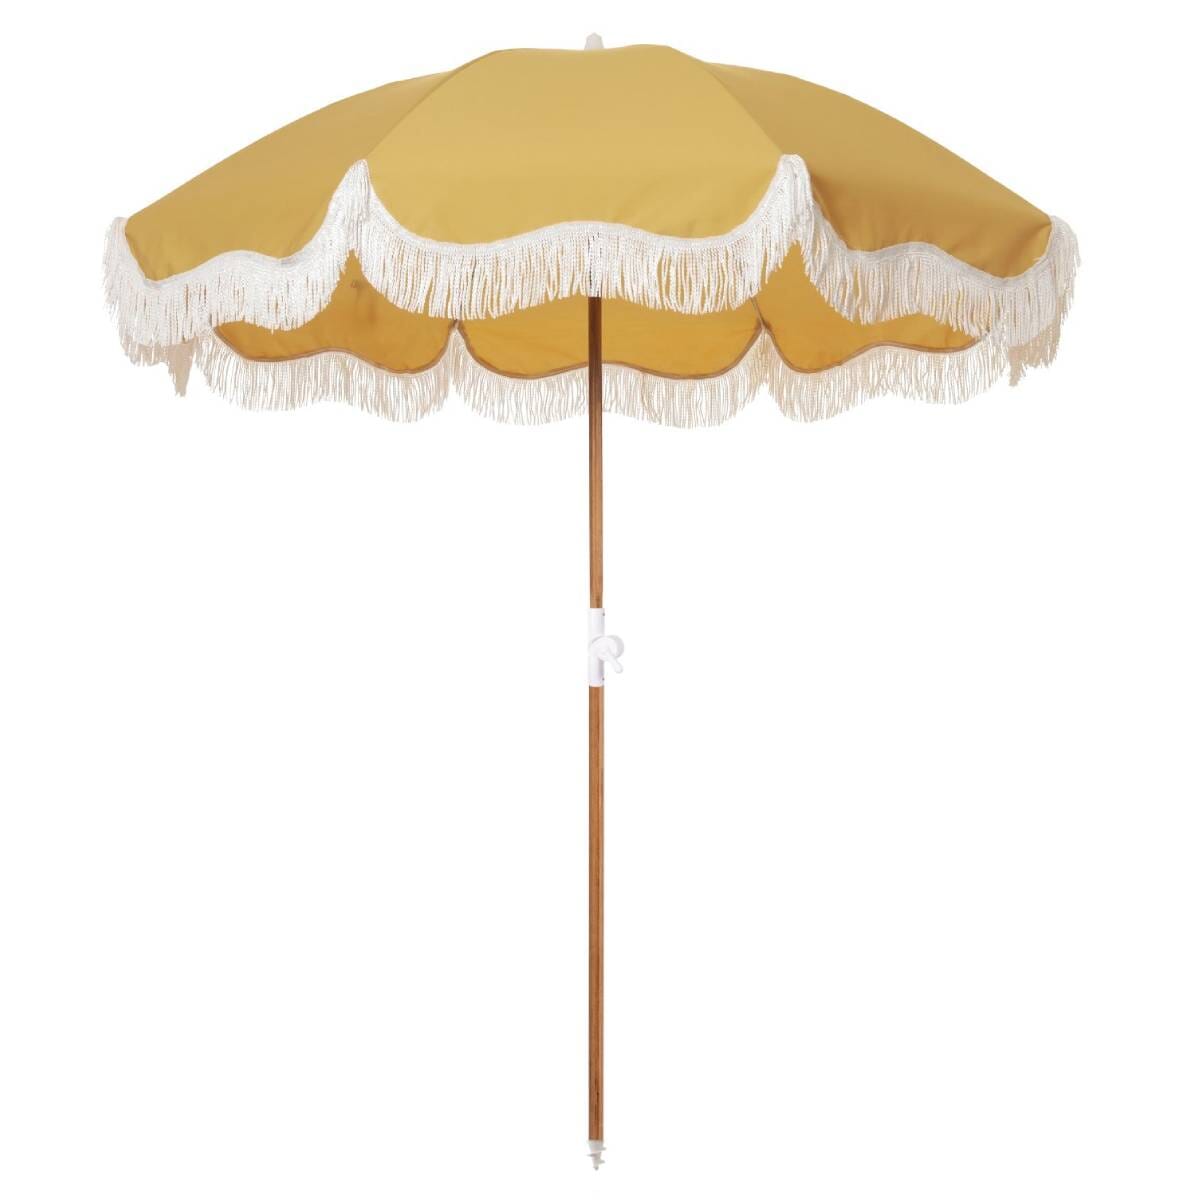 The Holiday Beach Umbrella - Vintage Gold - Business & Pleasure Co